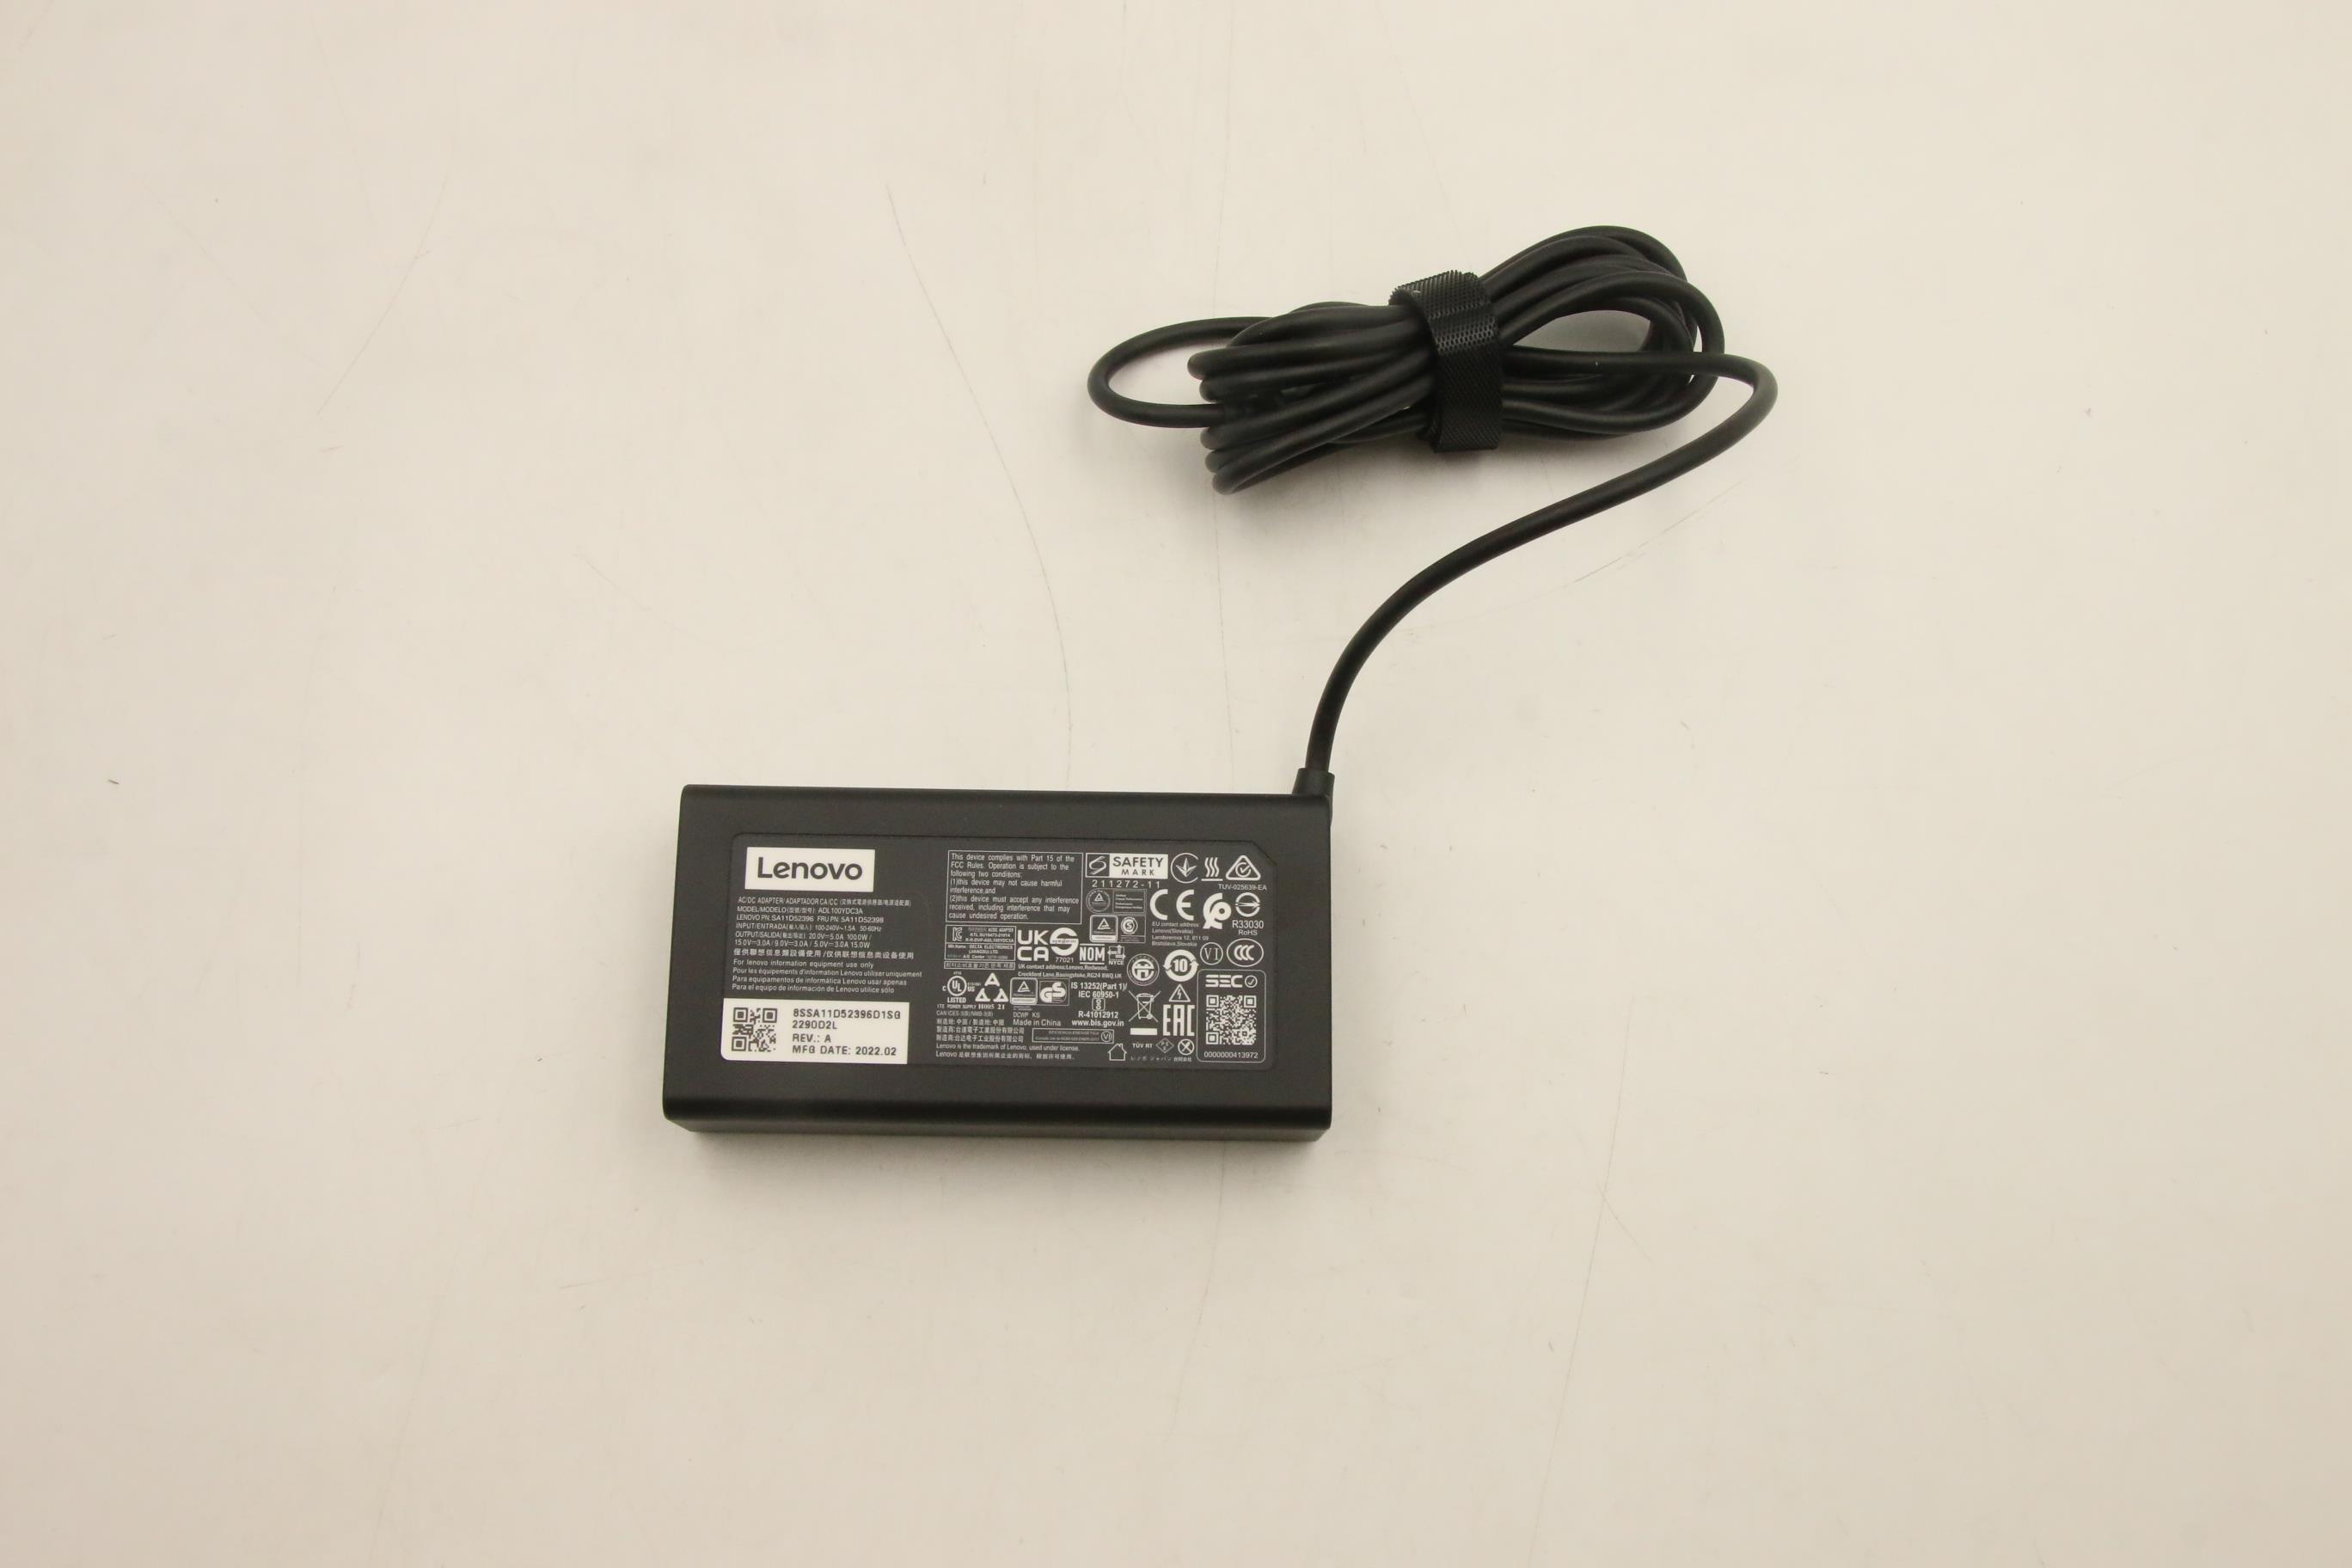 Lenovo ThinkPad T16 Gen 1 (21BV, 21BW) Laptop Charger (AC Adapter) - 5A11D52398